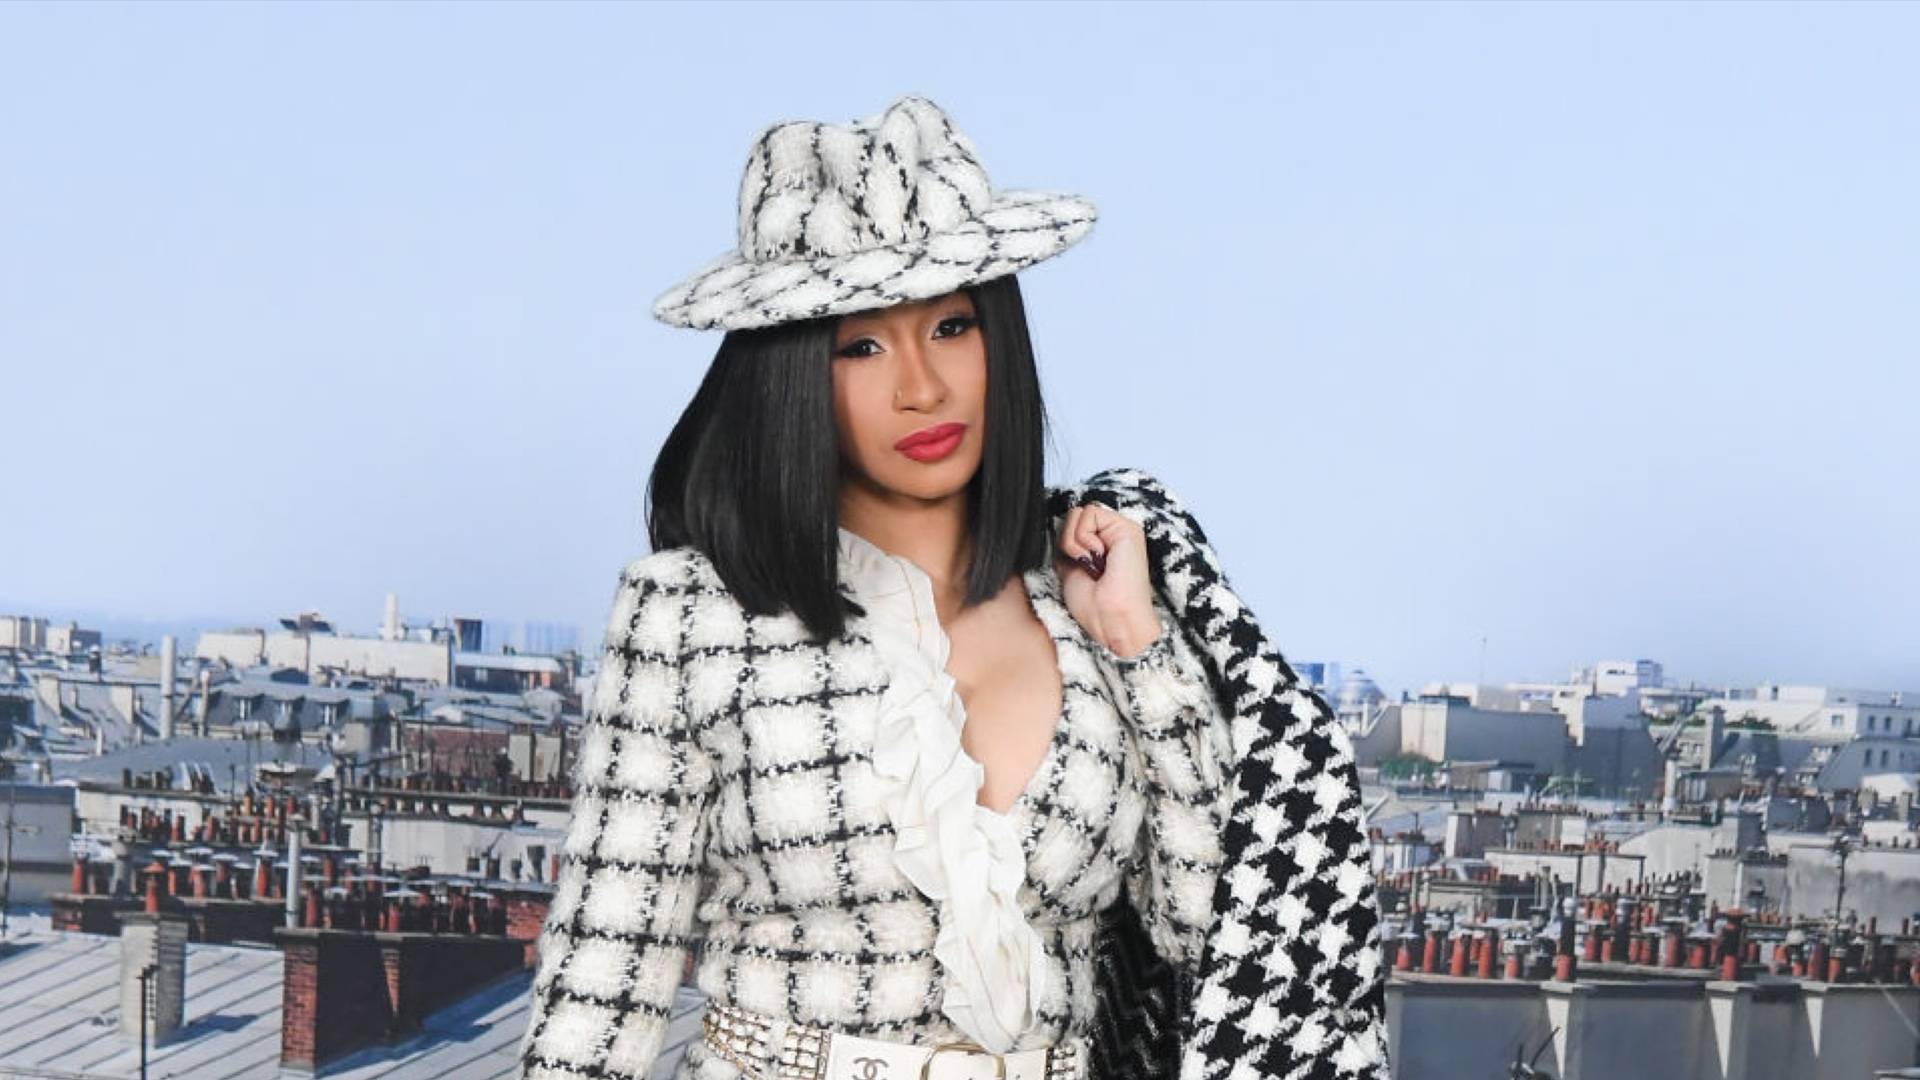 On the Streets, Stage, or the Red Carpet, Cardi B's Style Always Makes a  Statement